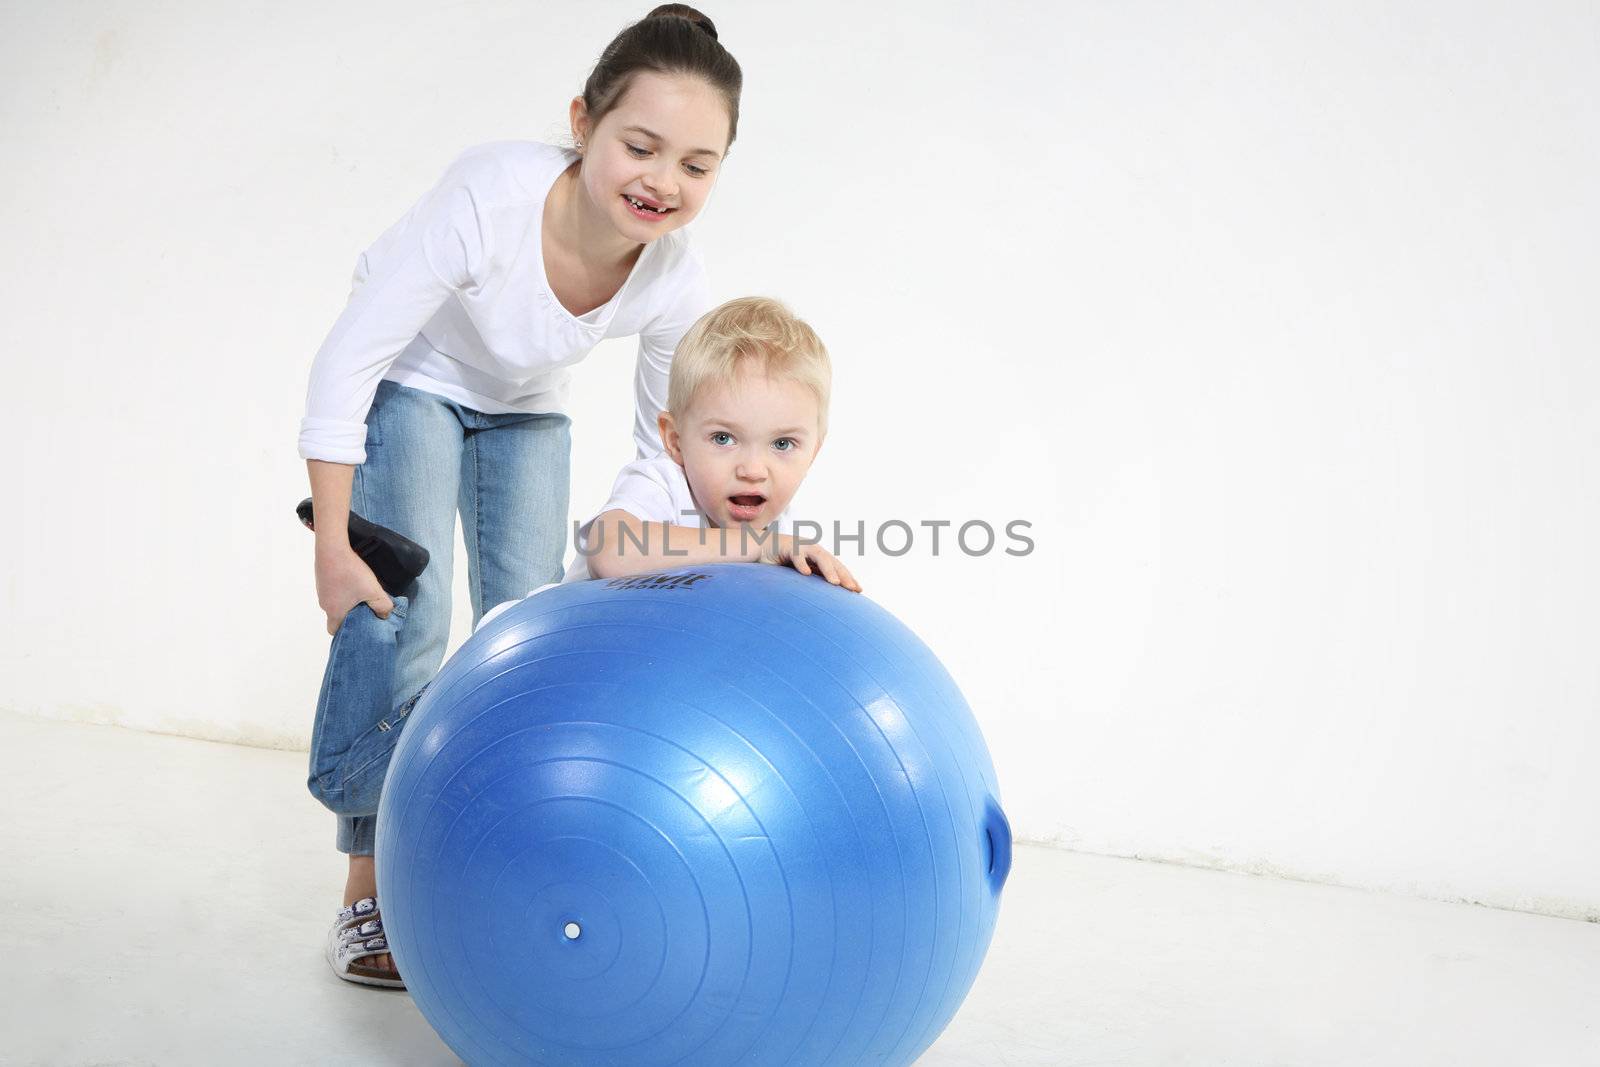 Brother and sister posing with a rubber ball